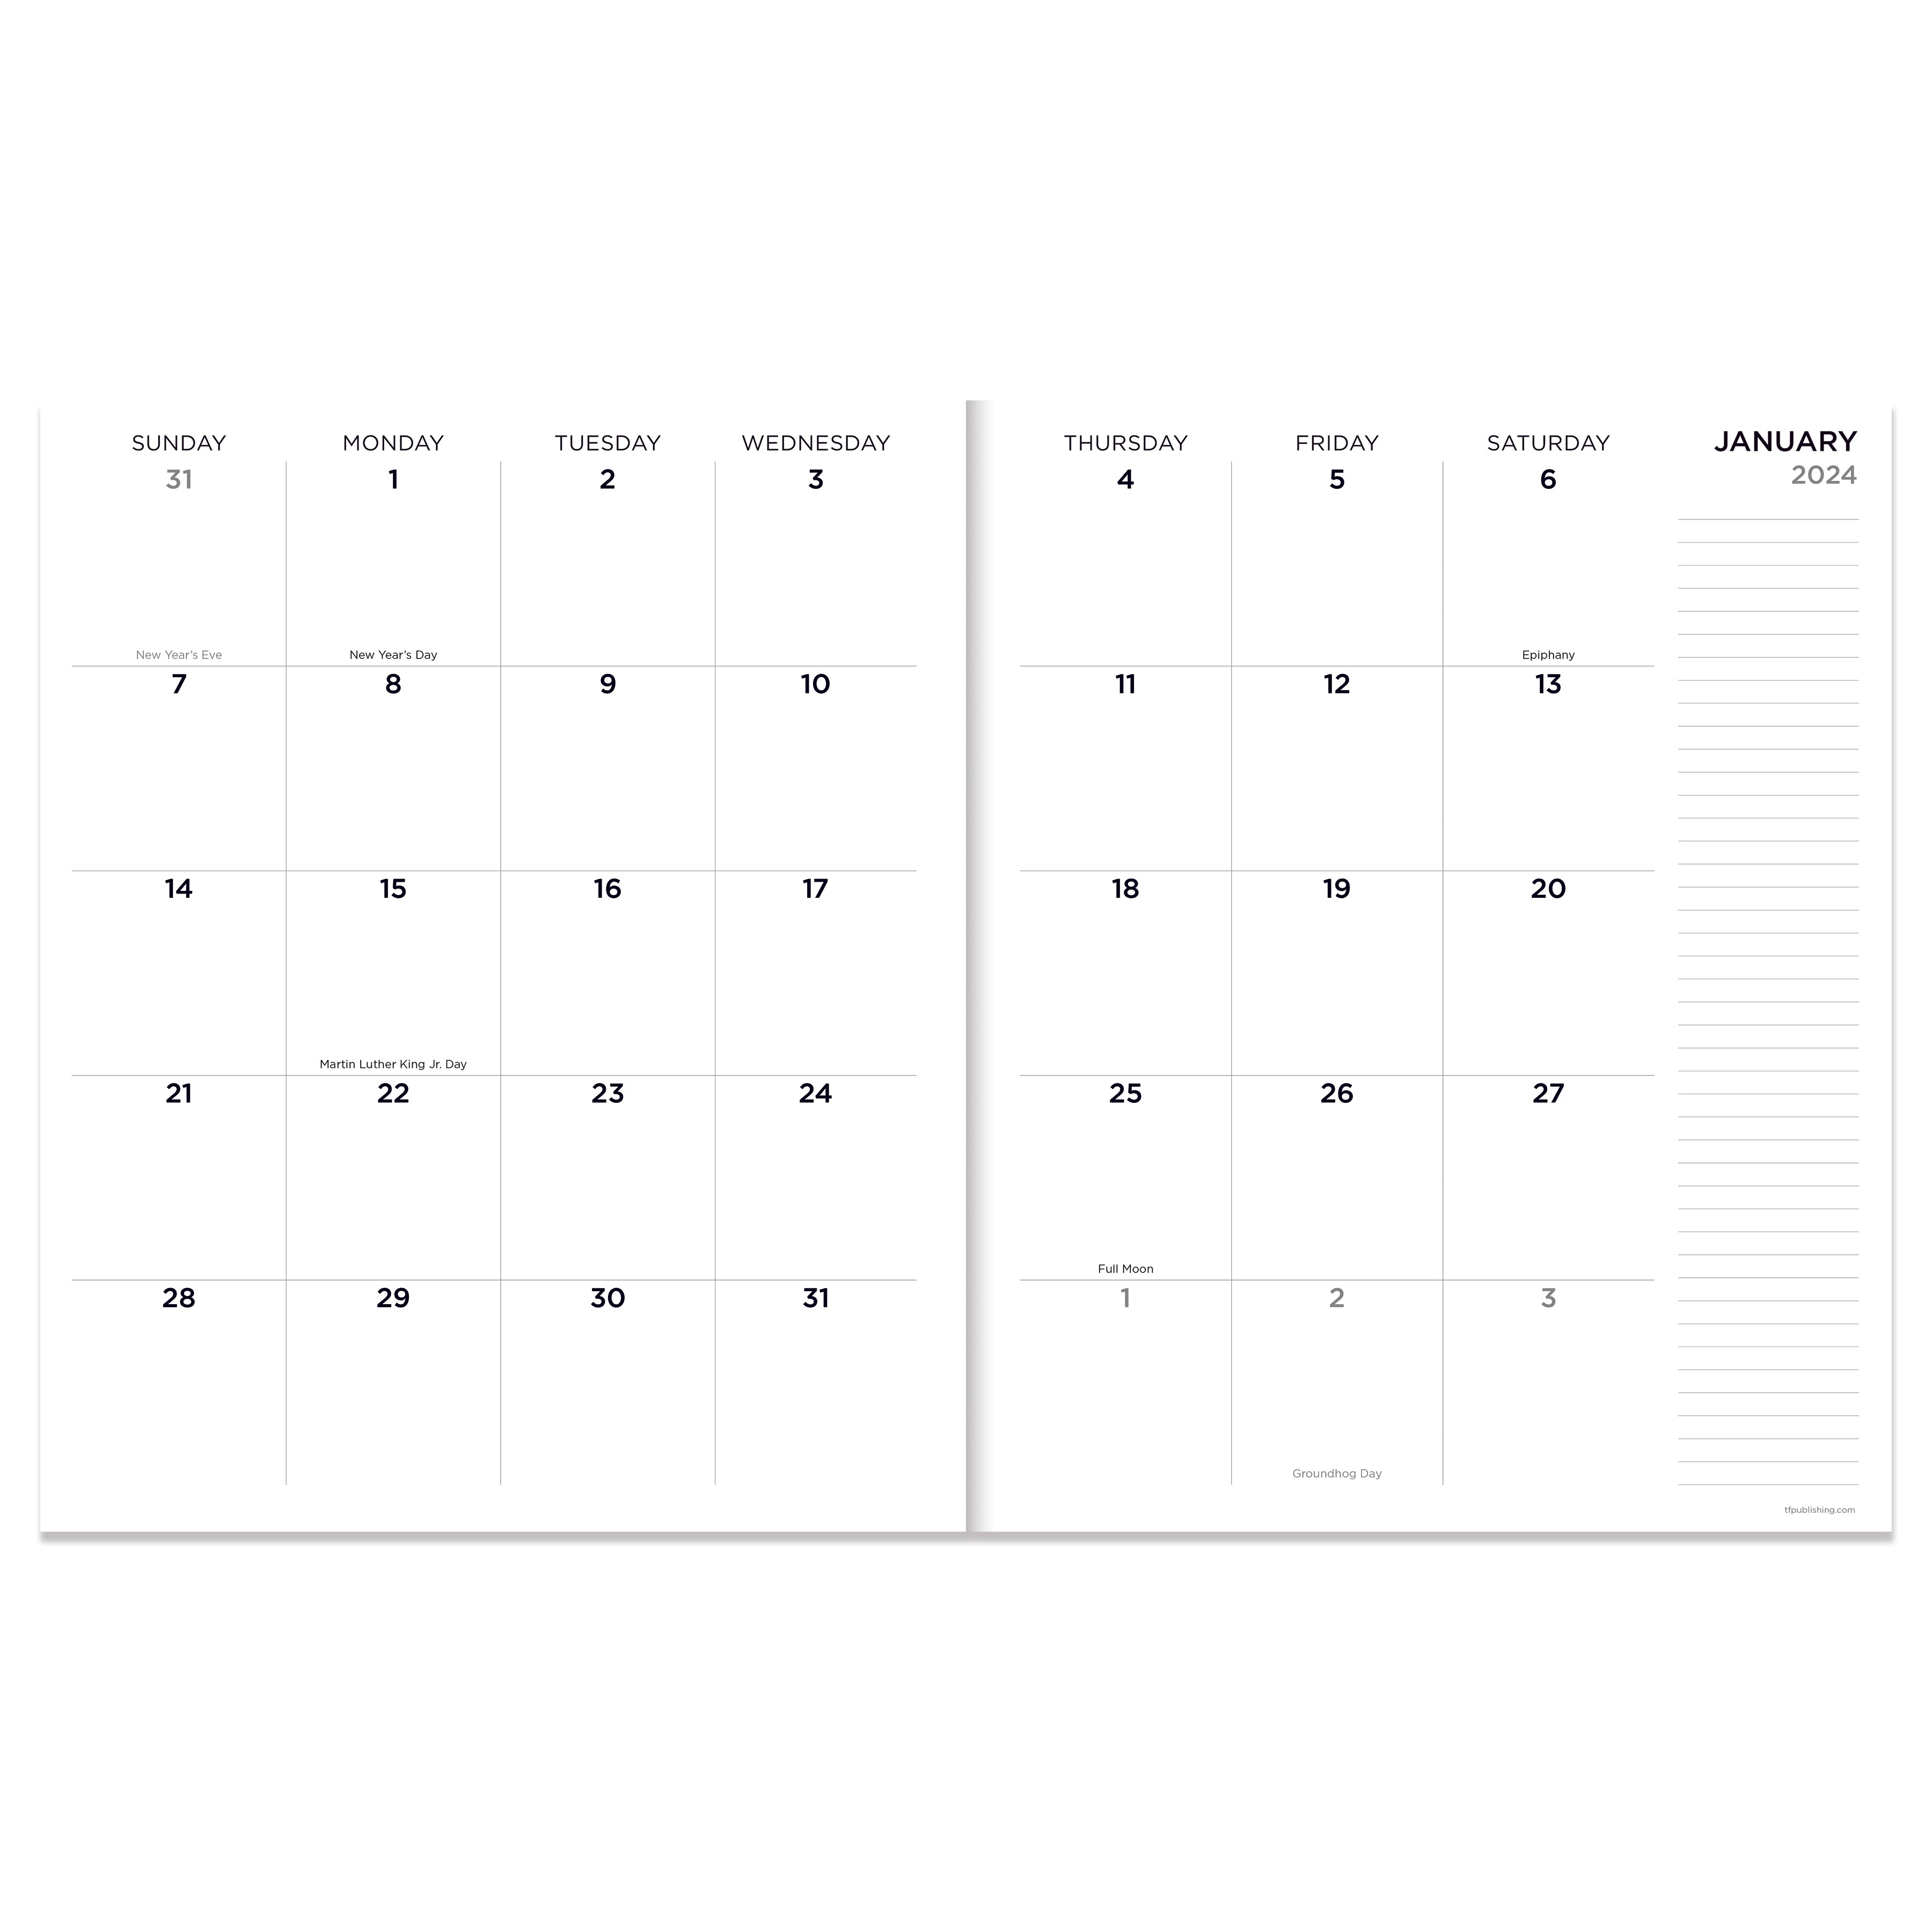 2024 Botanical Dream - Large Monthly Diary/Planner US